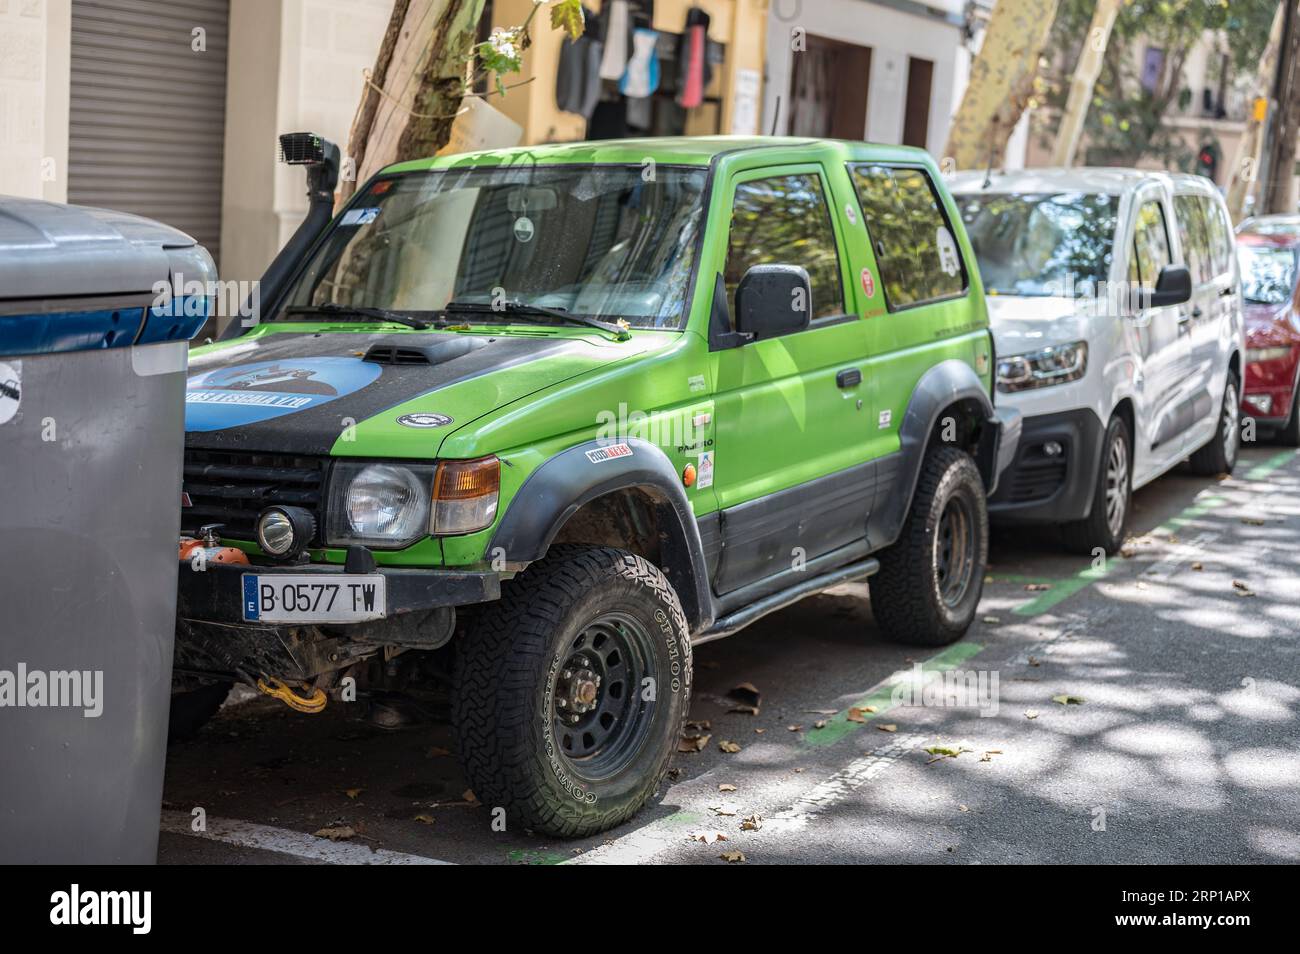 An old green Mitsubishi Montero Pajero SUV with a black hood tuned for the SUV Stock Photo